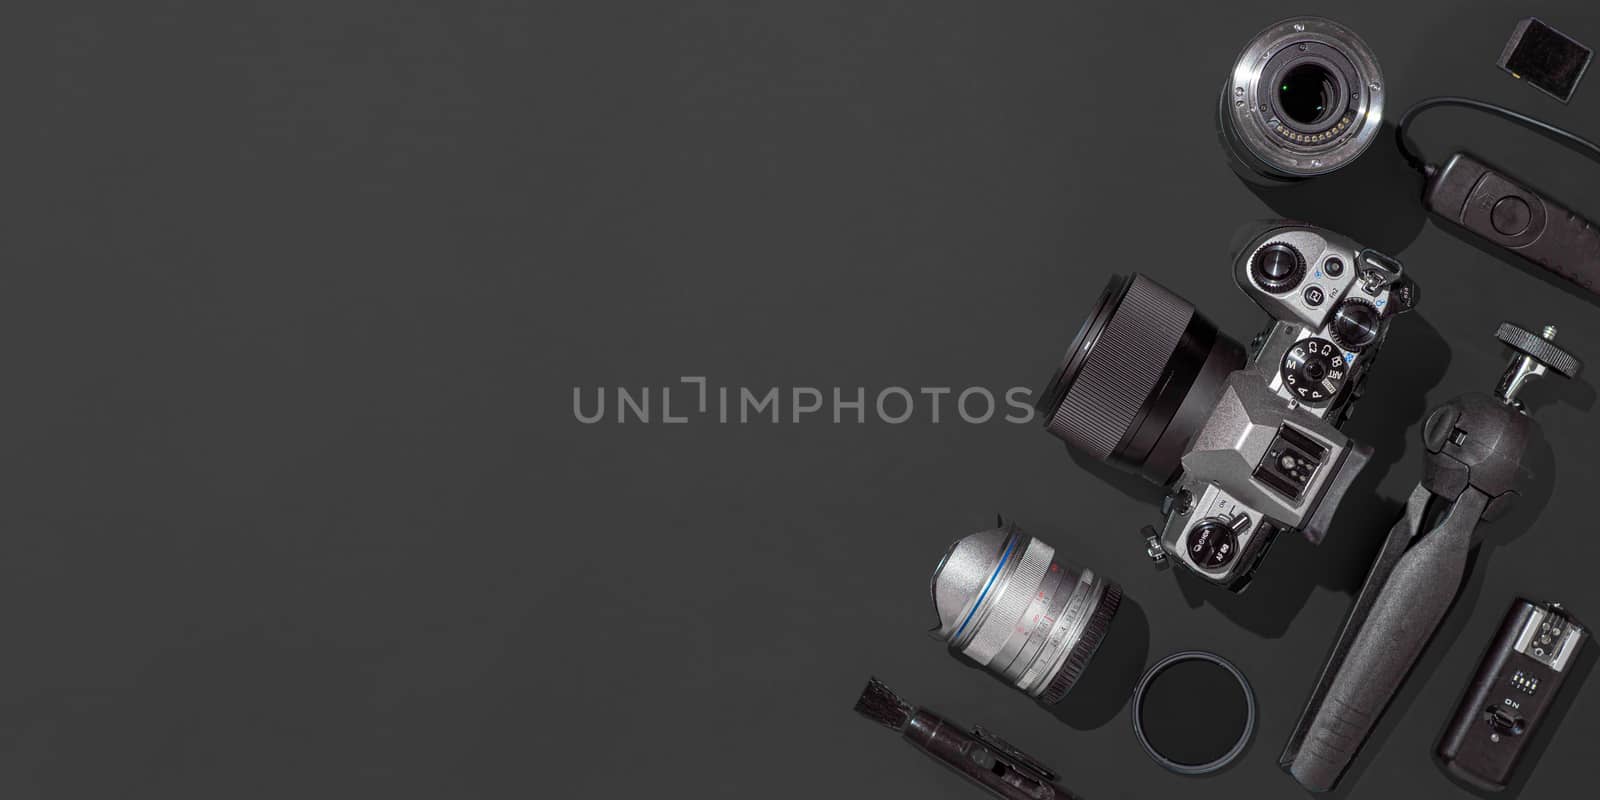 Photographer workplace with dslr camera, lens, pen tablet and camera accessories on black background. Camera, photography, visual content concept. Flat lay or top view. Copy space. Hard light. Banner